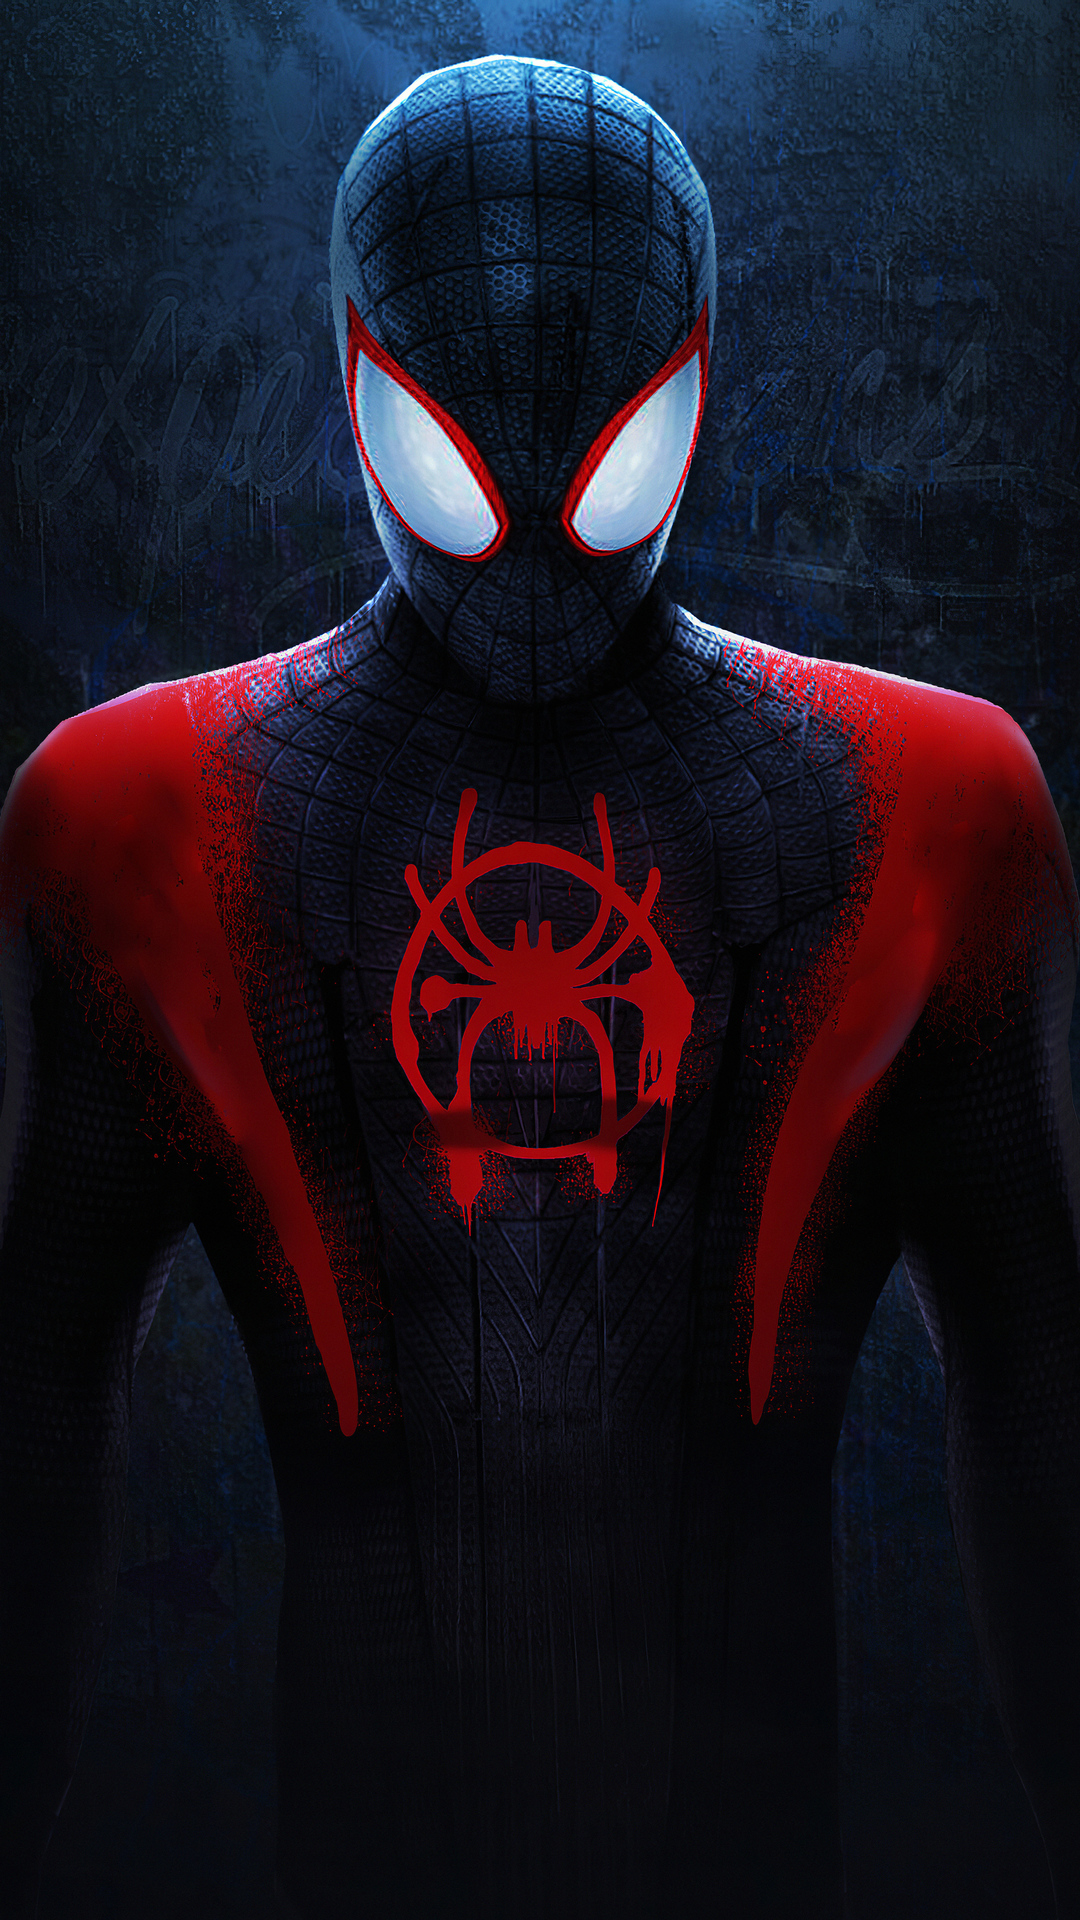 Spiderman Wallpaper Android Moble - Spider-man - 1080x1920 Wallpaper -  